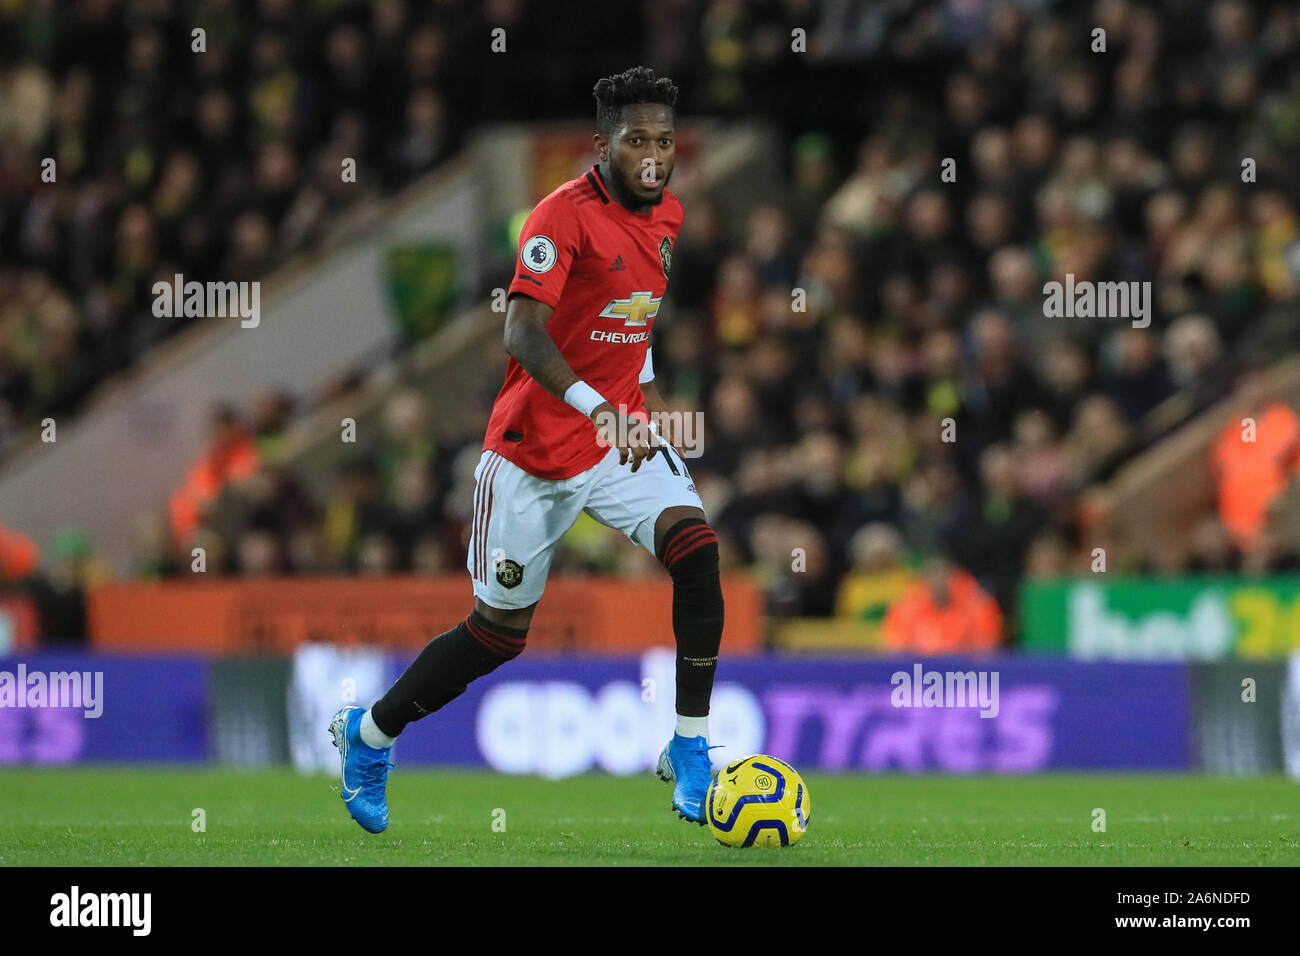 27th October 2019, Carrow Road, Norwich, England; Premier League, Norwich City v Manchester United : Fred (17) of Manchester United in action during the game  Credit: Mark Cosgrove/News Images Stock Photo